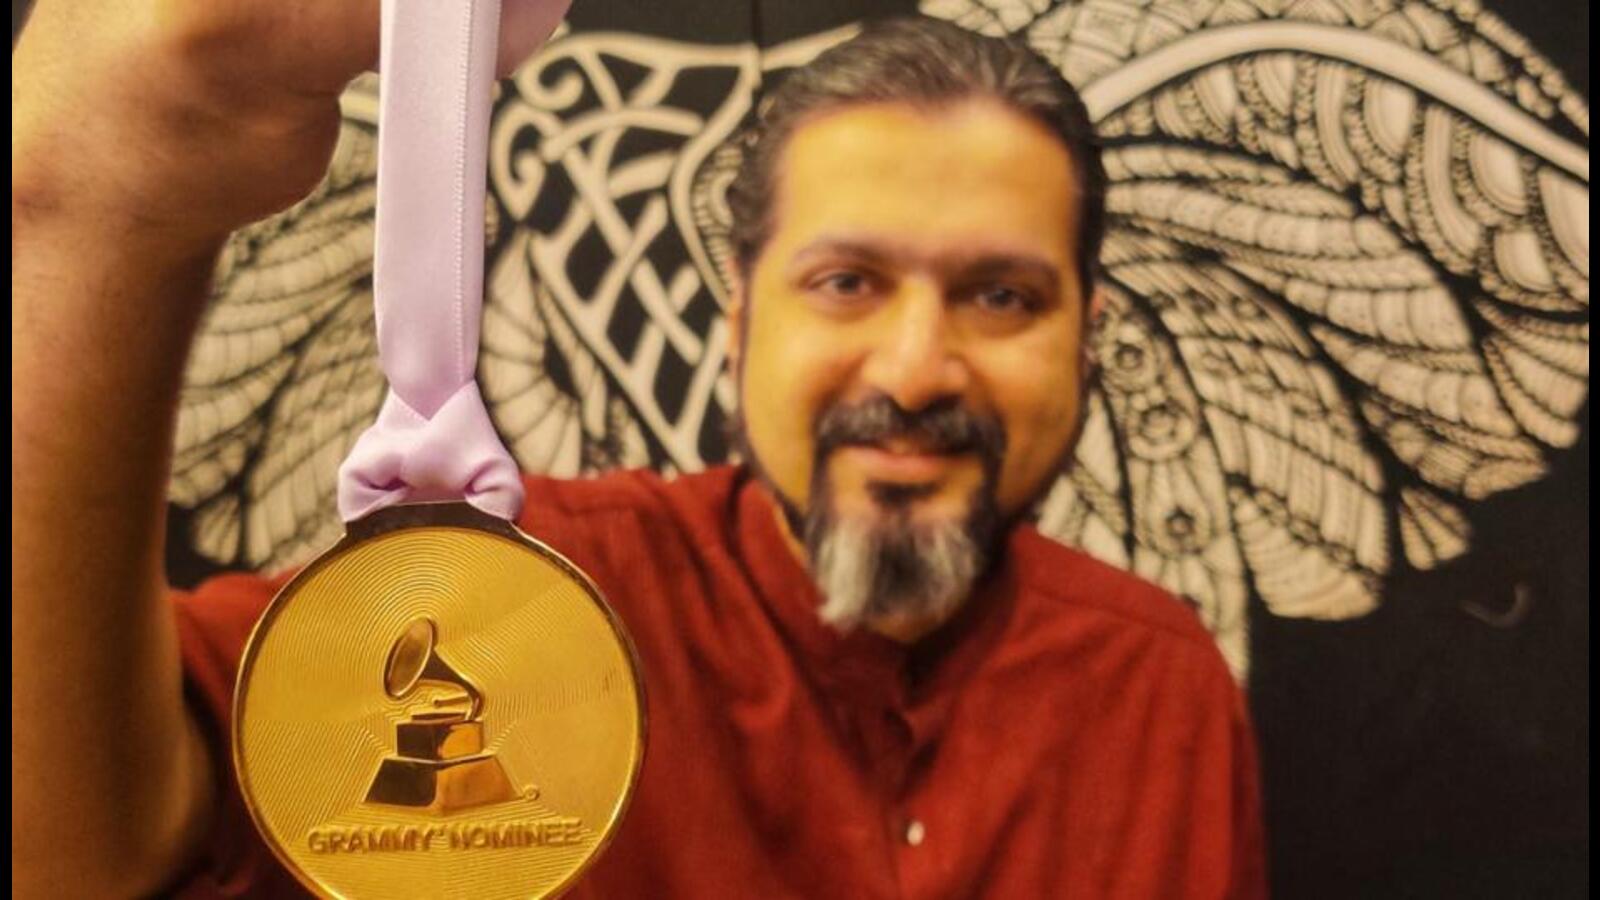 Ricky Kej gets his Grammy medallion after 2 months: Had no other alternative but to contact the Customs directly on Twitter